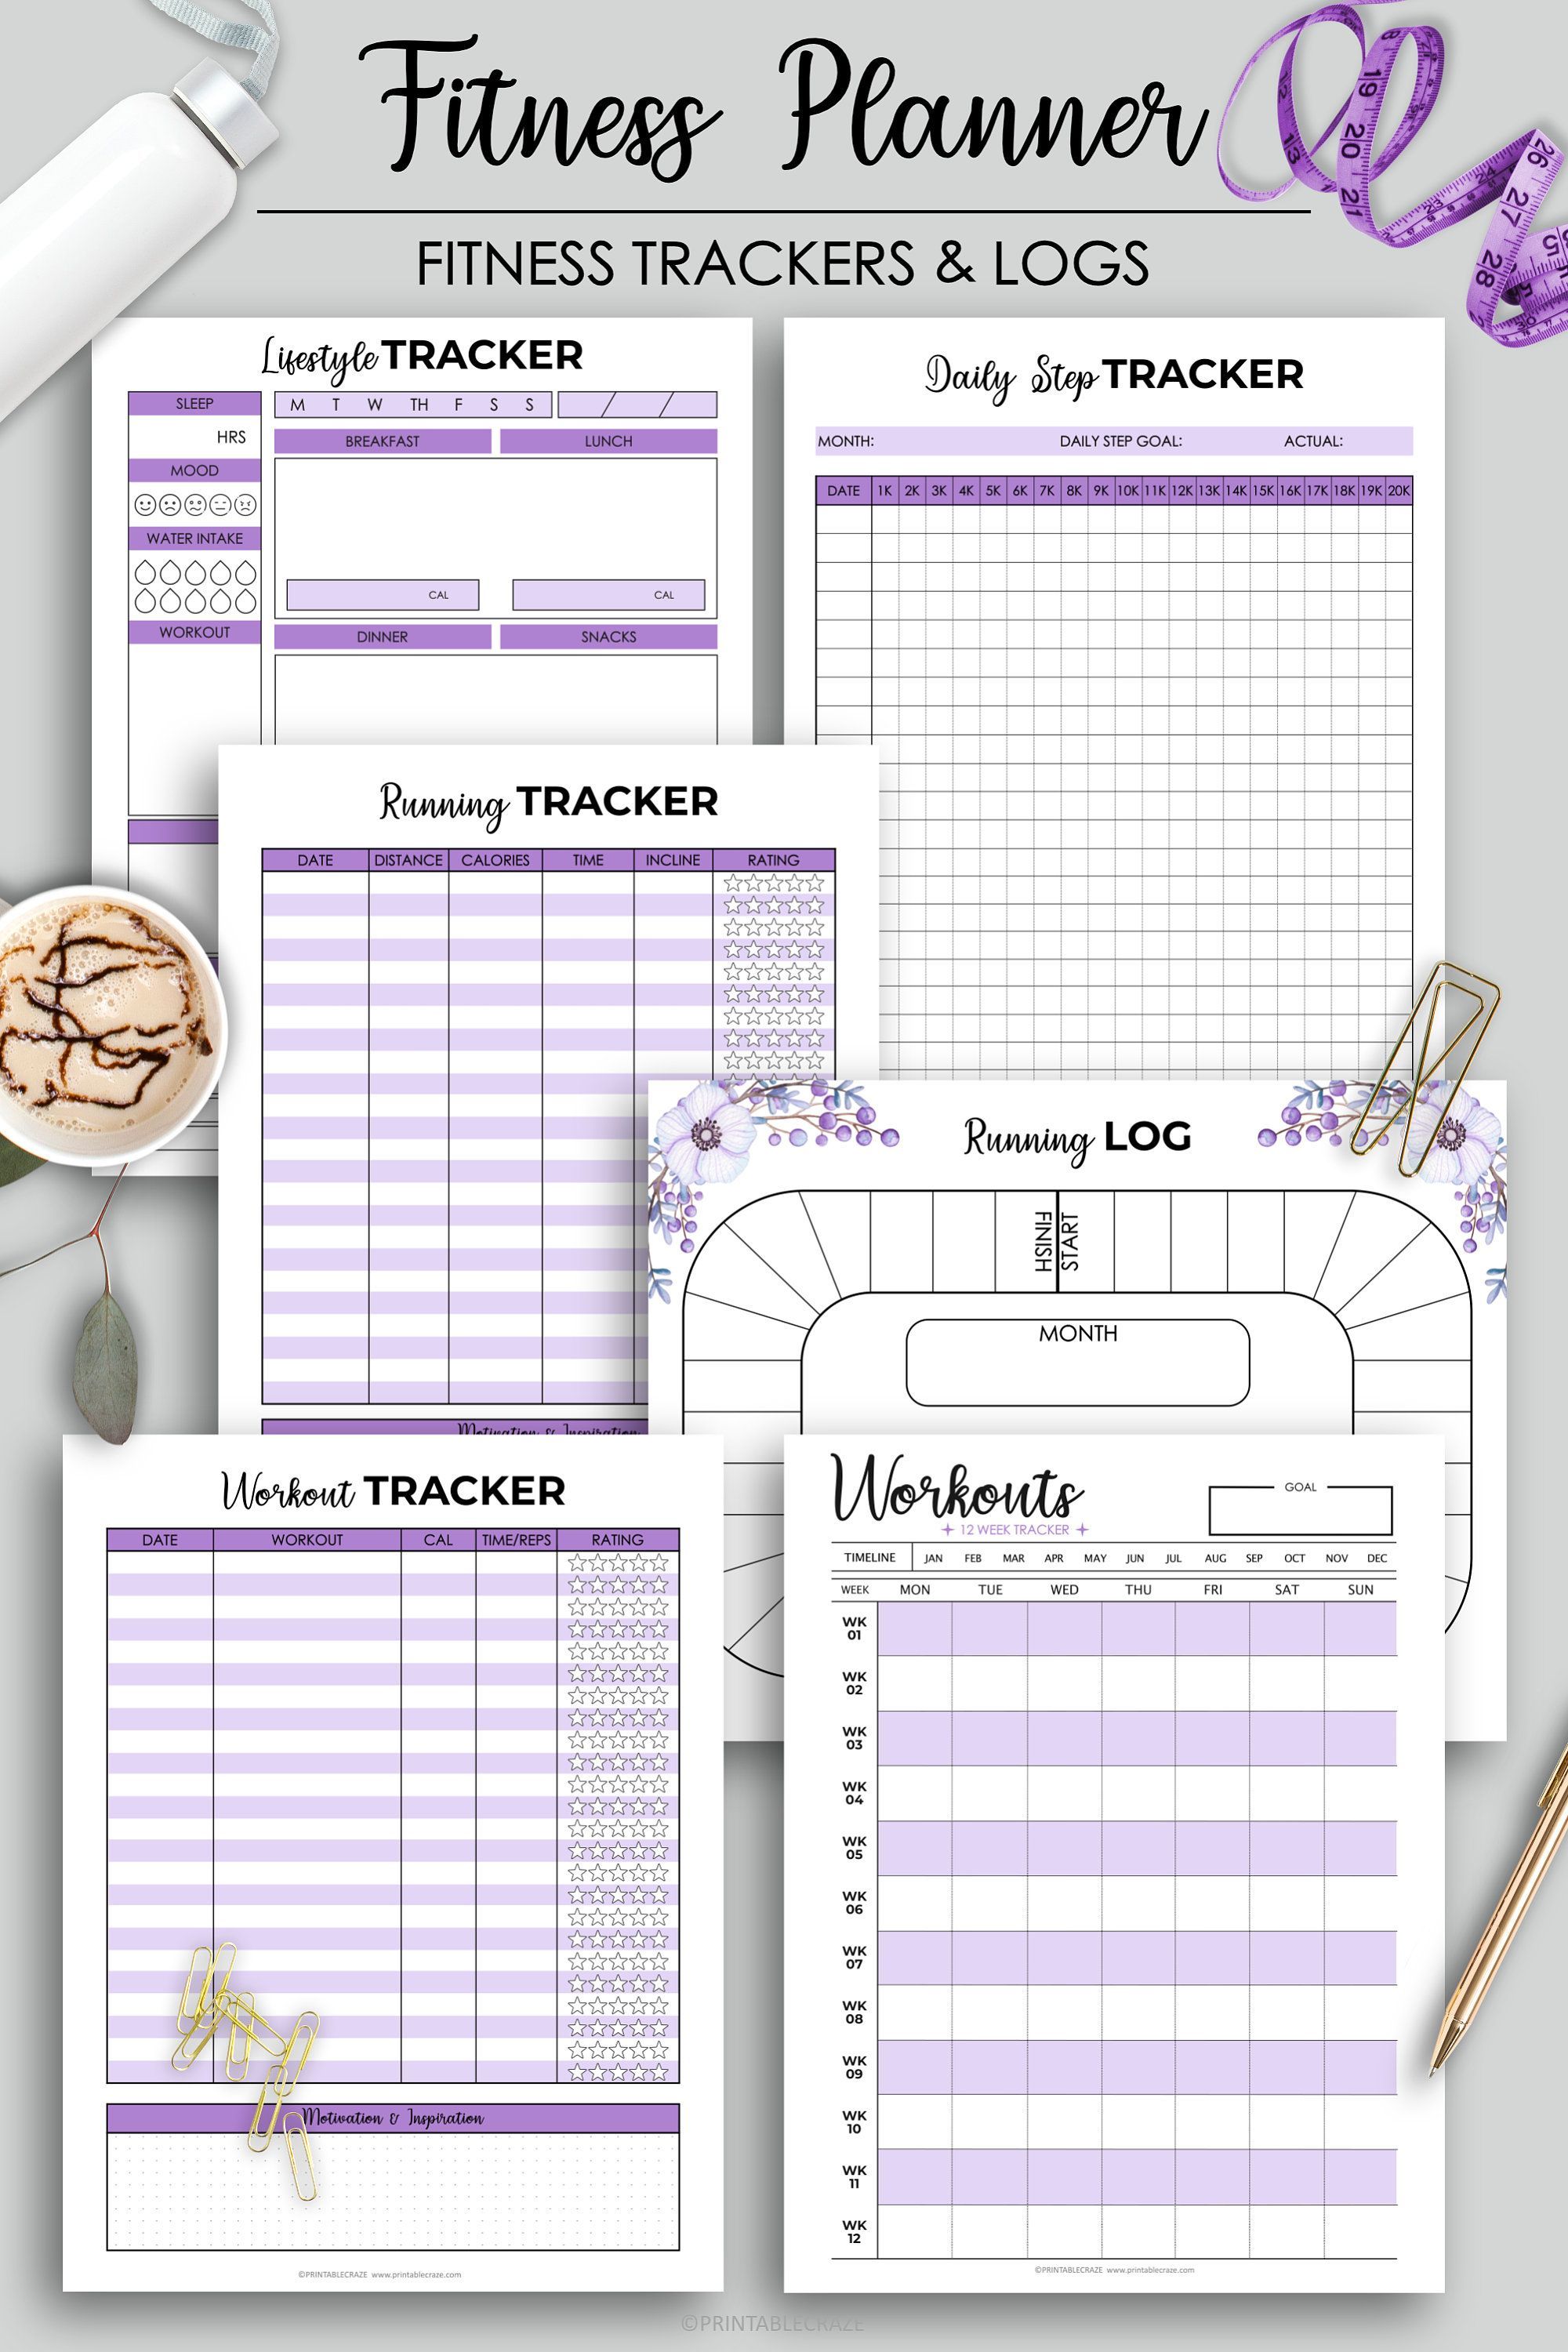 Fitness Planner Printable Weight Loss Health Planner Fitness Journal Workout Log Food Diary Calorie Tracker Daily Weight Loss Step Tracker -   fitness Planner inspiration